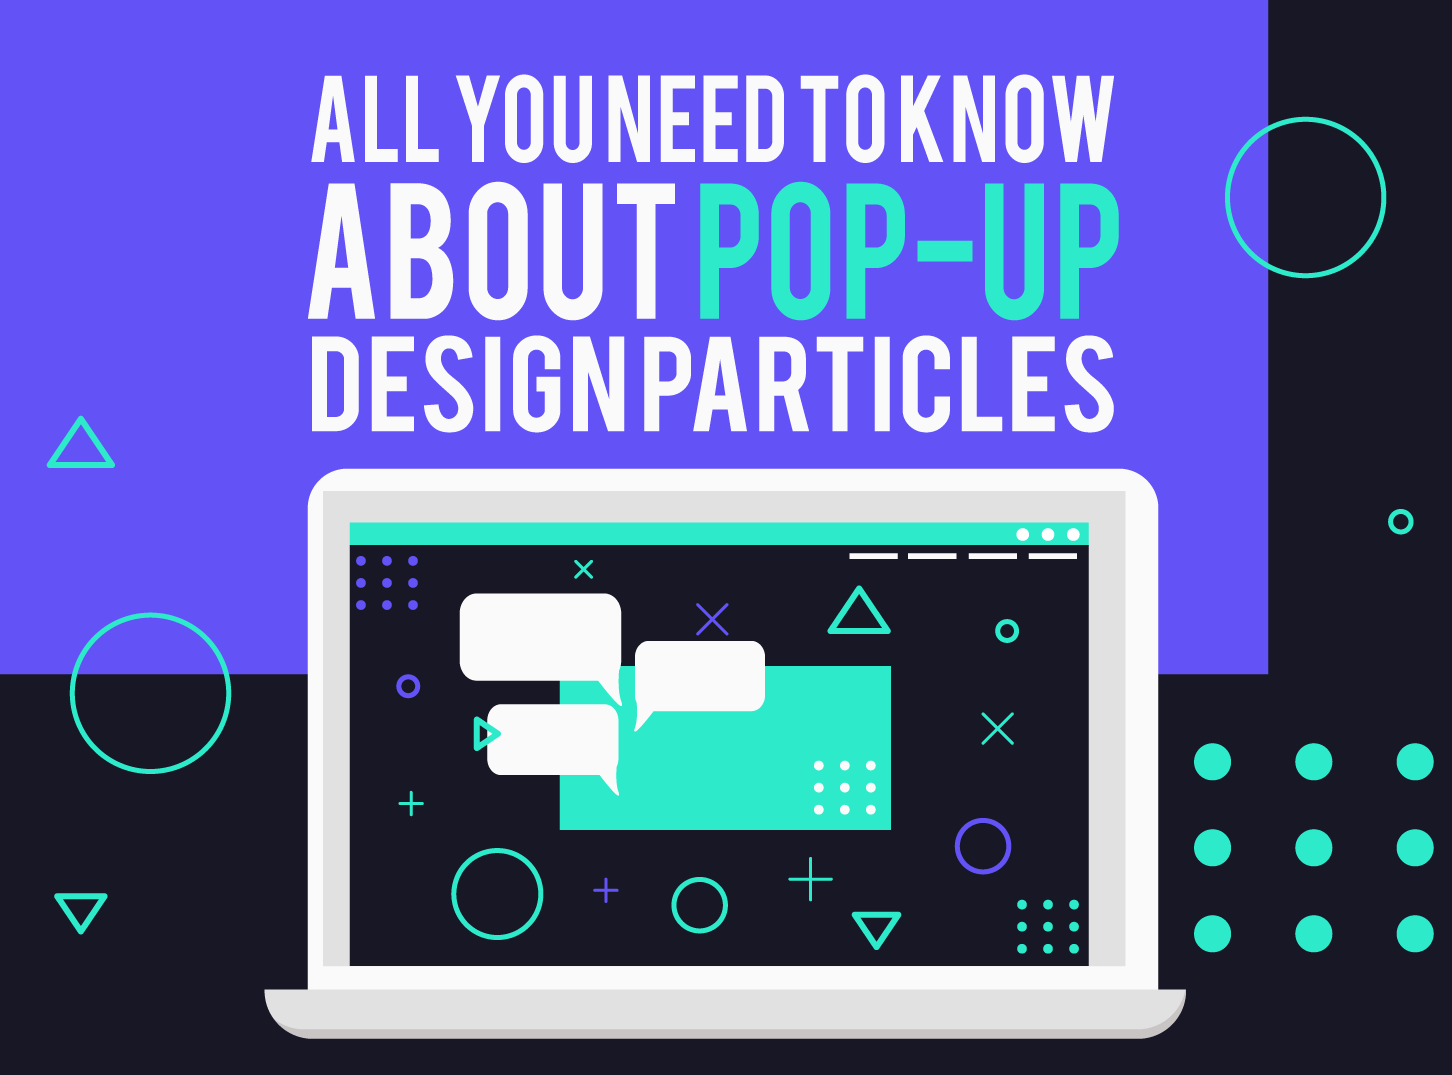 Pop-Up Design - How to Get most out of your Pop-up ad - Inkyy Web Design & Branding Studio